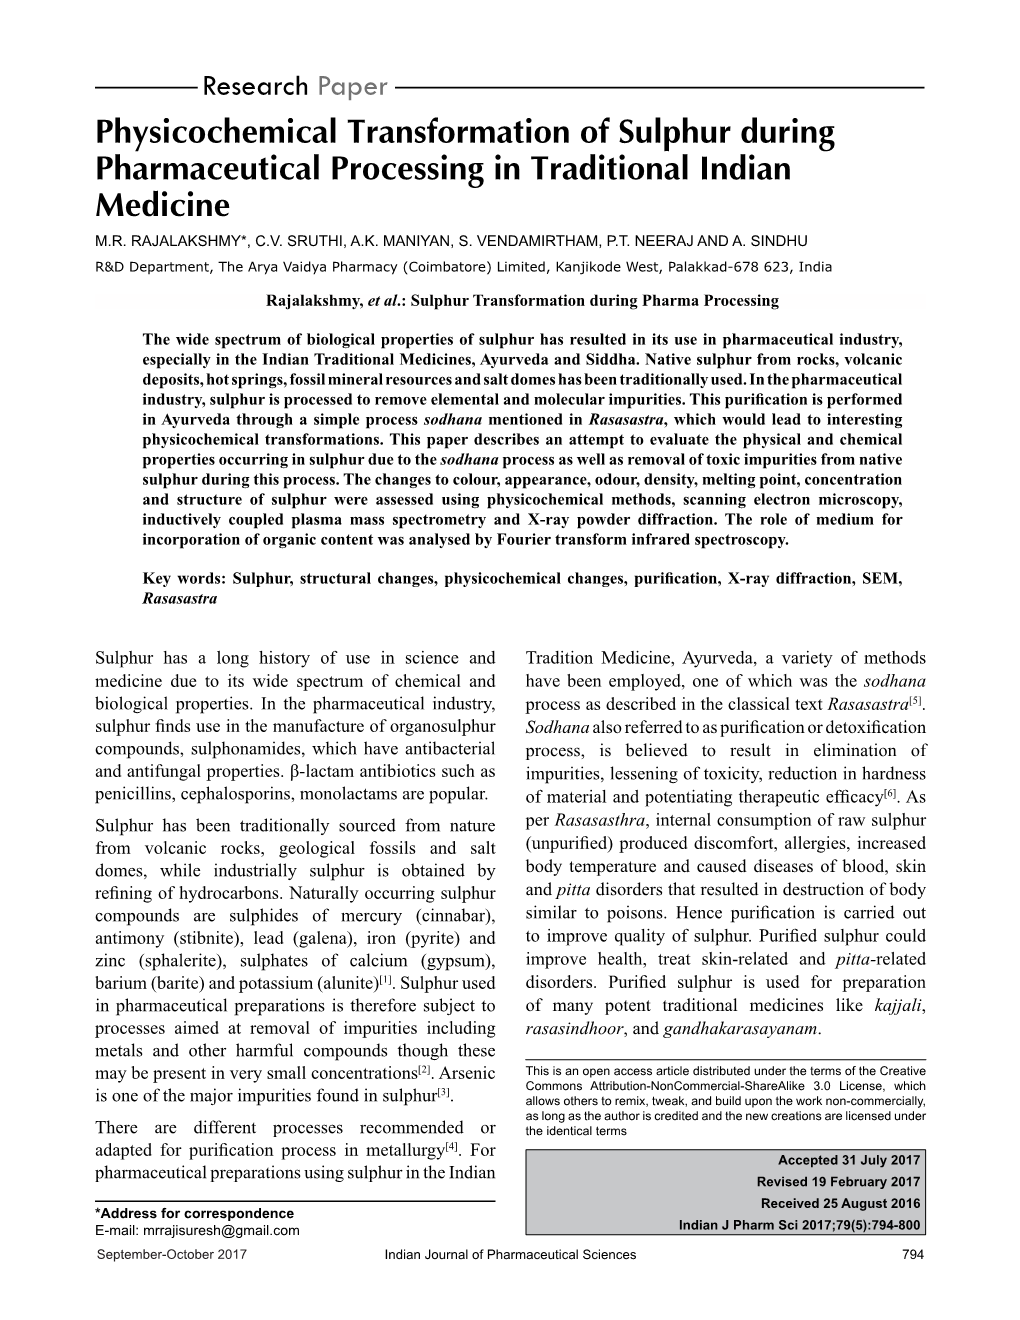 Physicochemical Transformation of Sulphur During Pharmaceutical Processing in Traditional Indian Medicine M.R